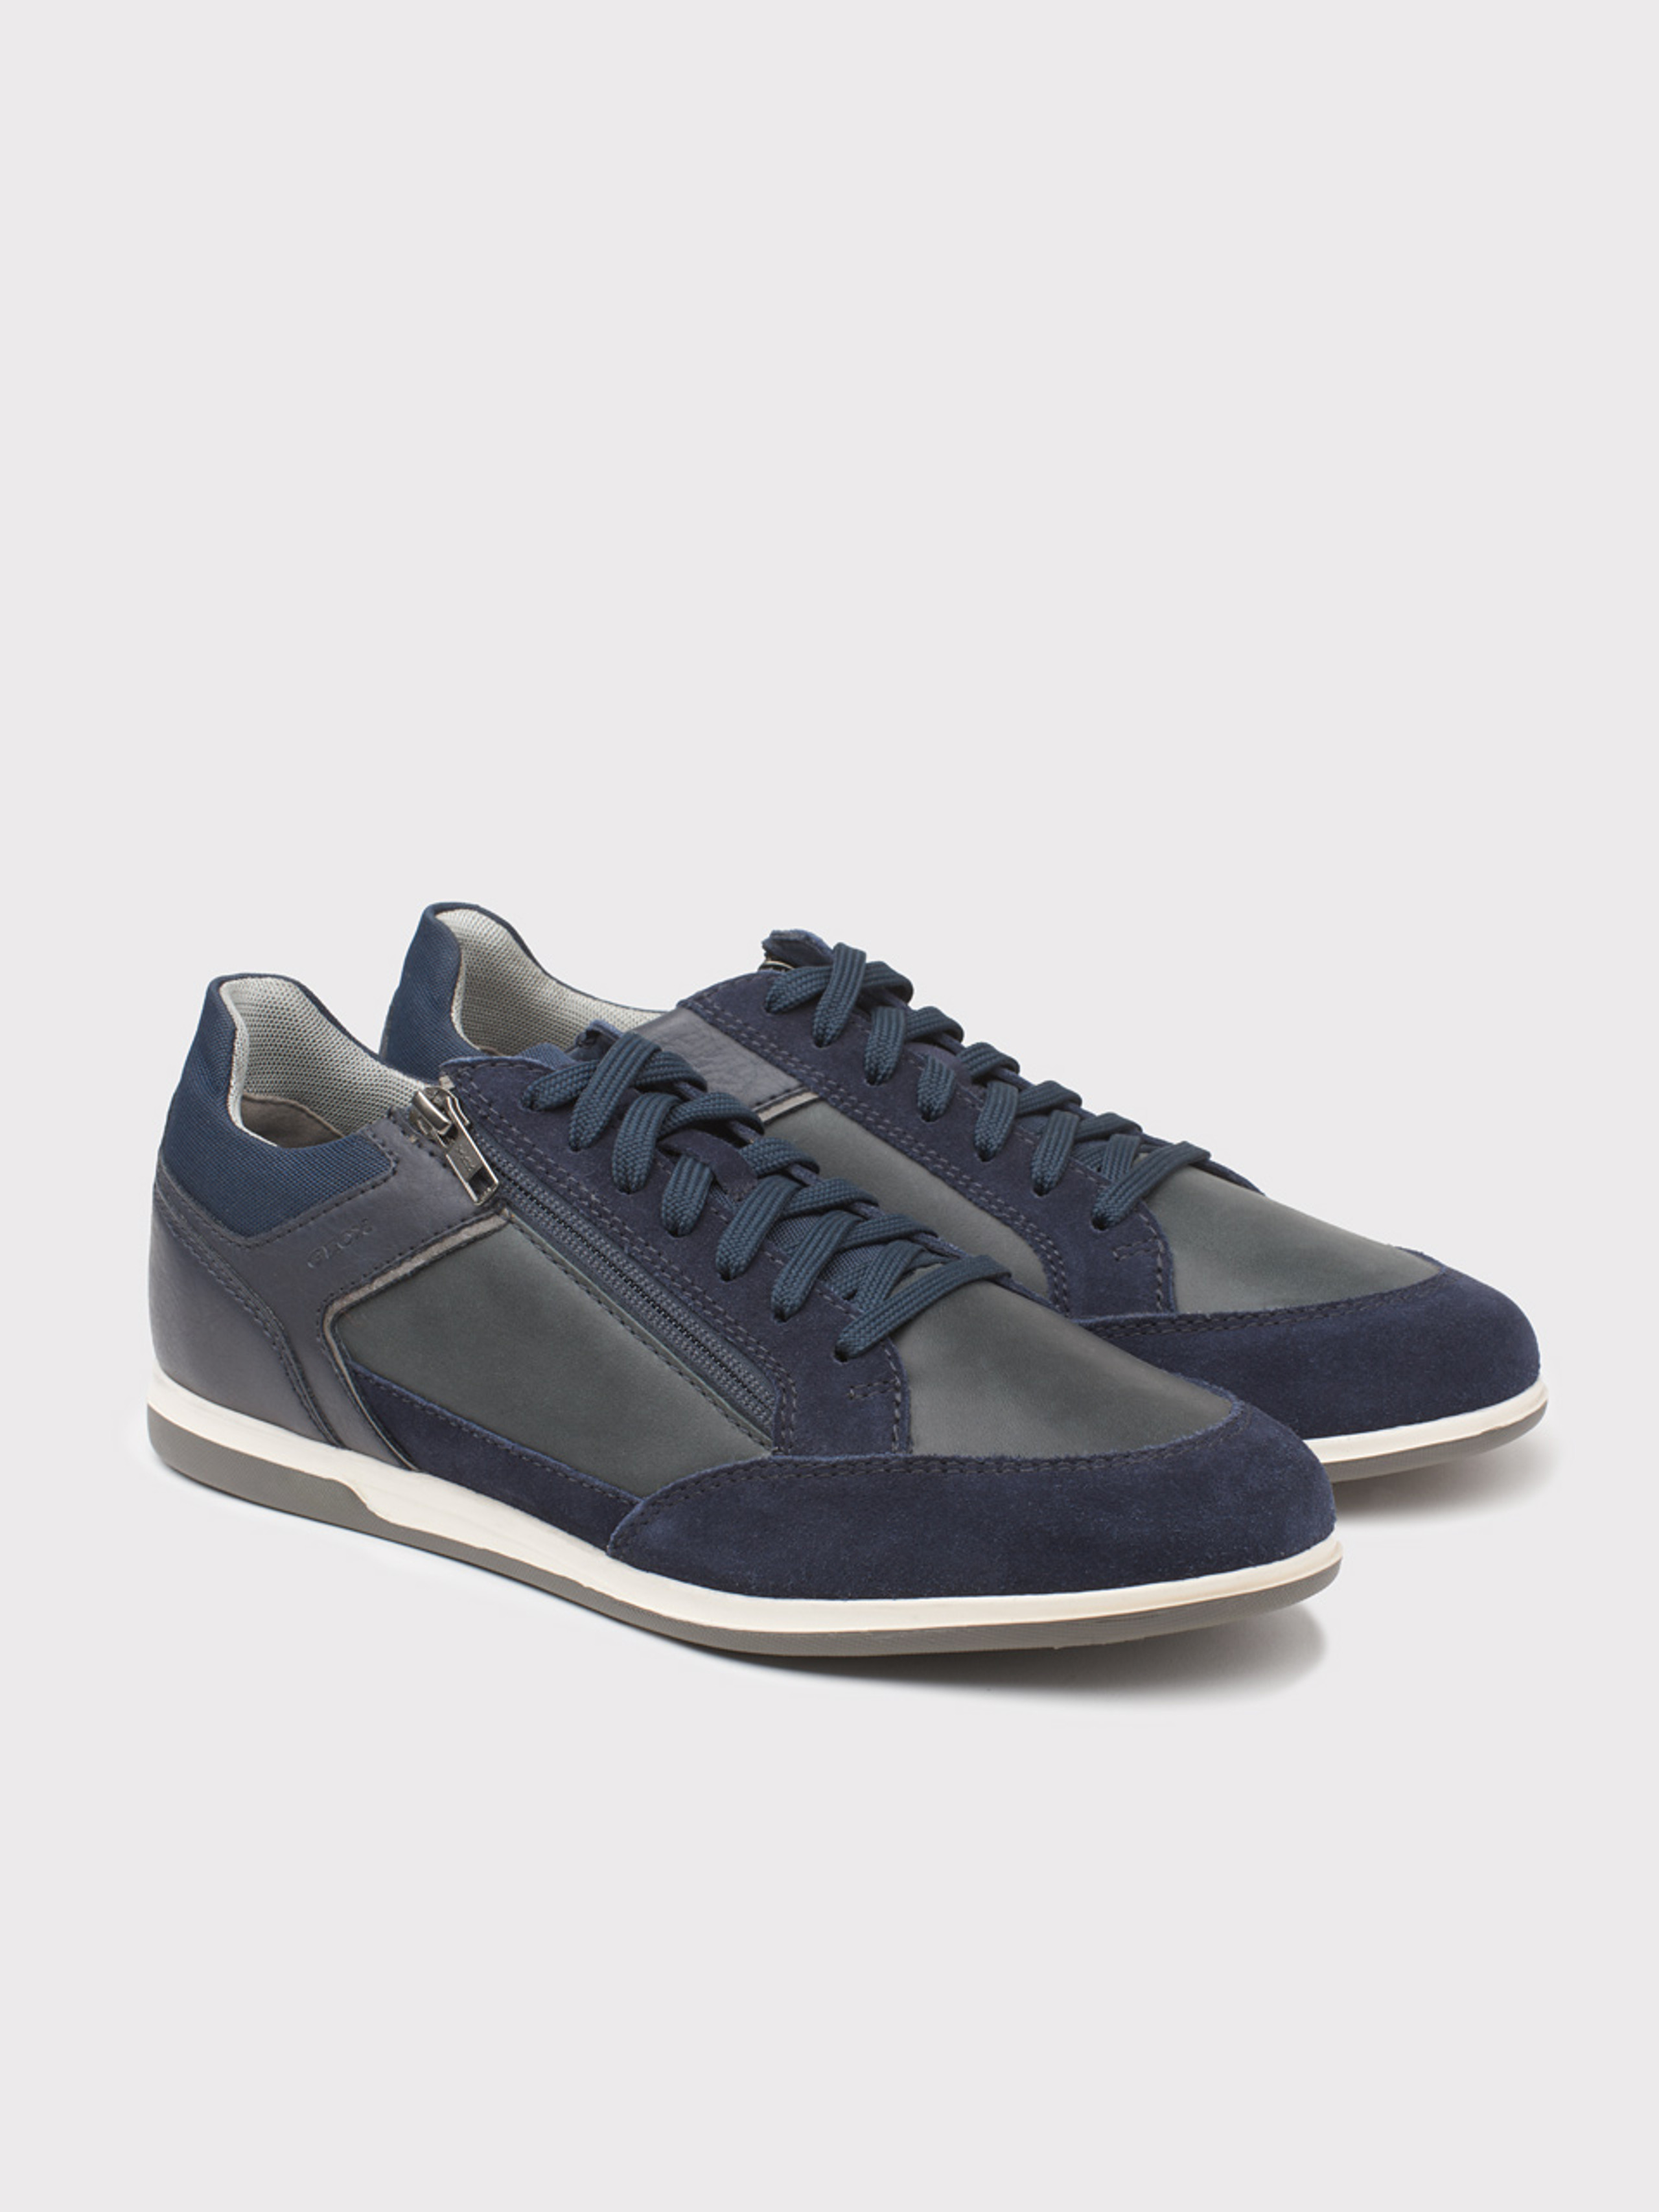 Men's Geox Waxed Leather & Suede Trainer | Peter Christian